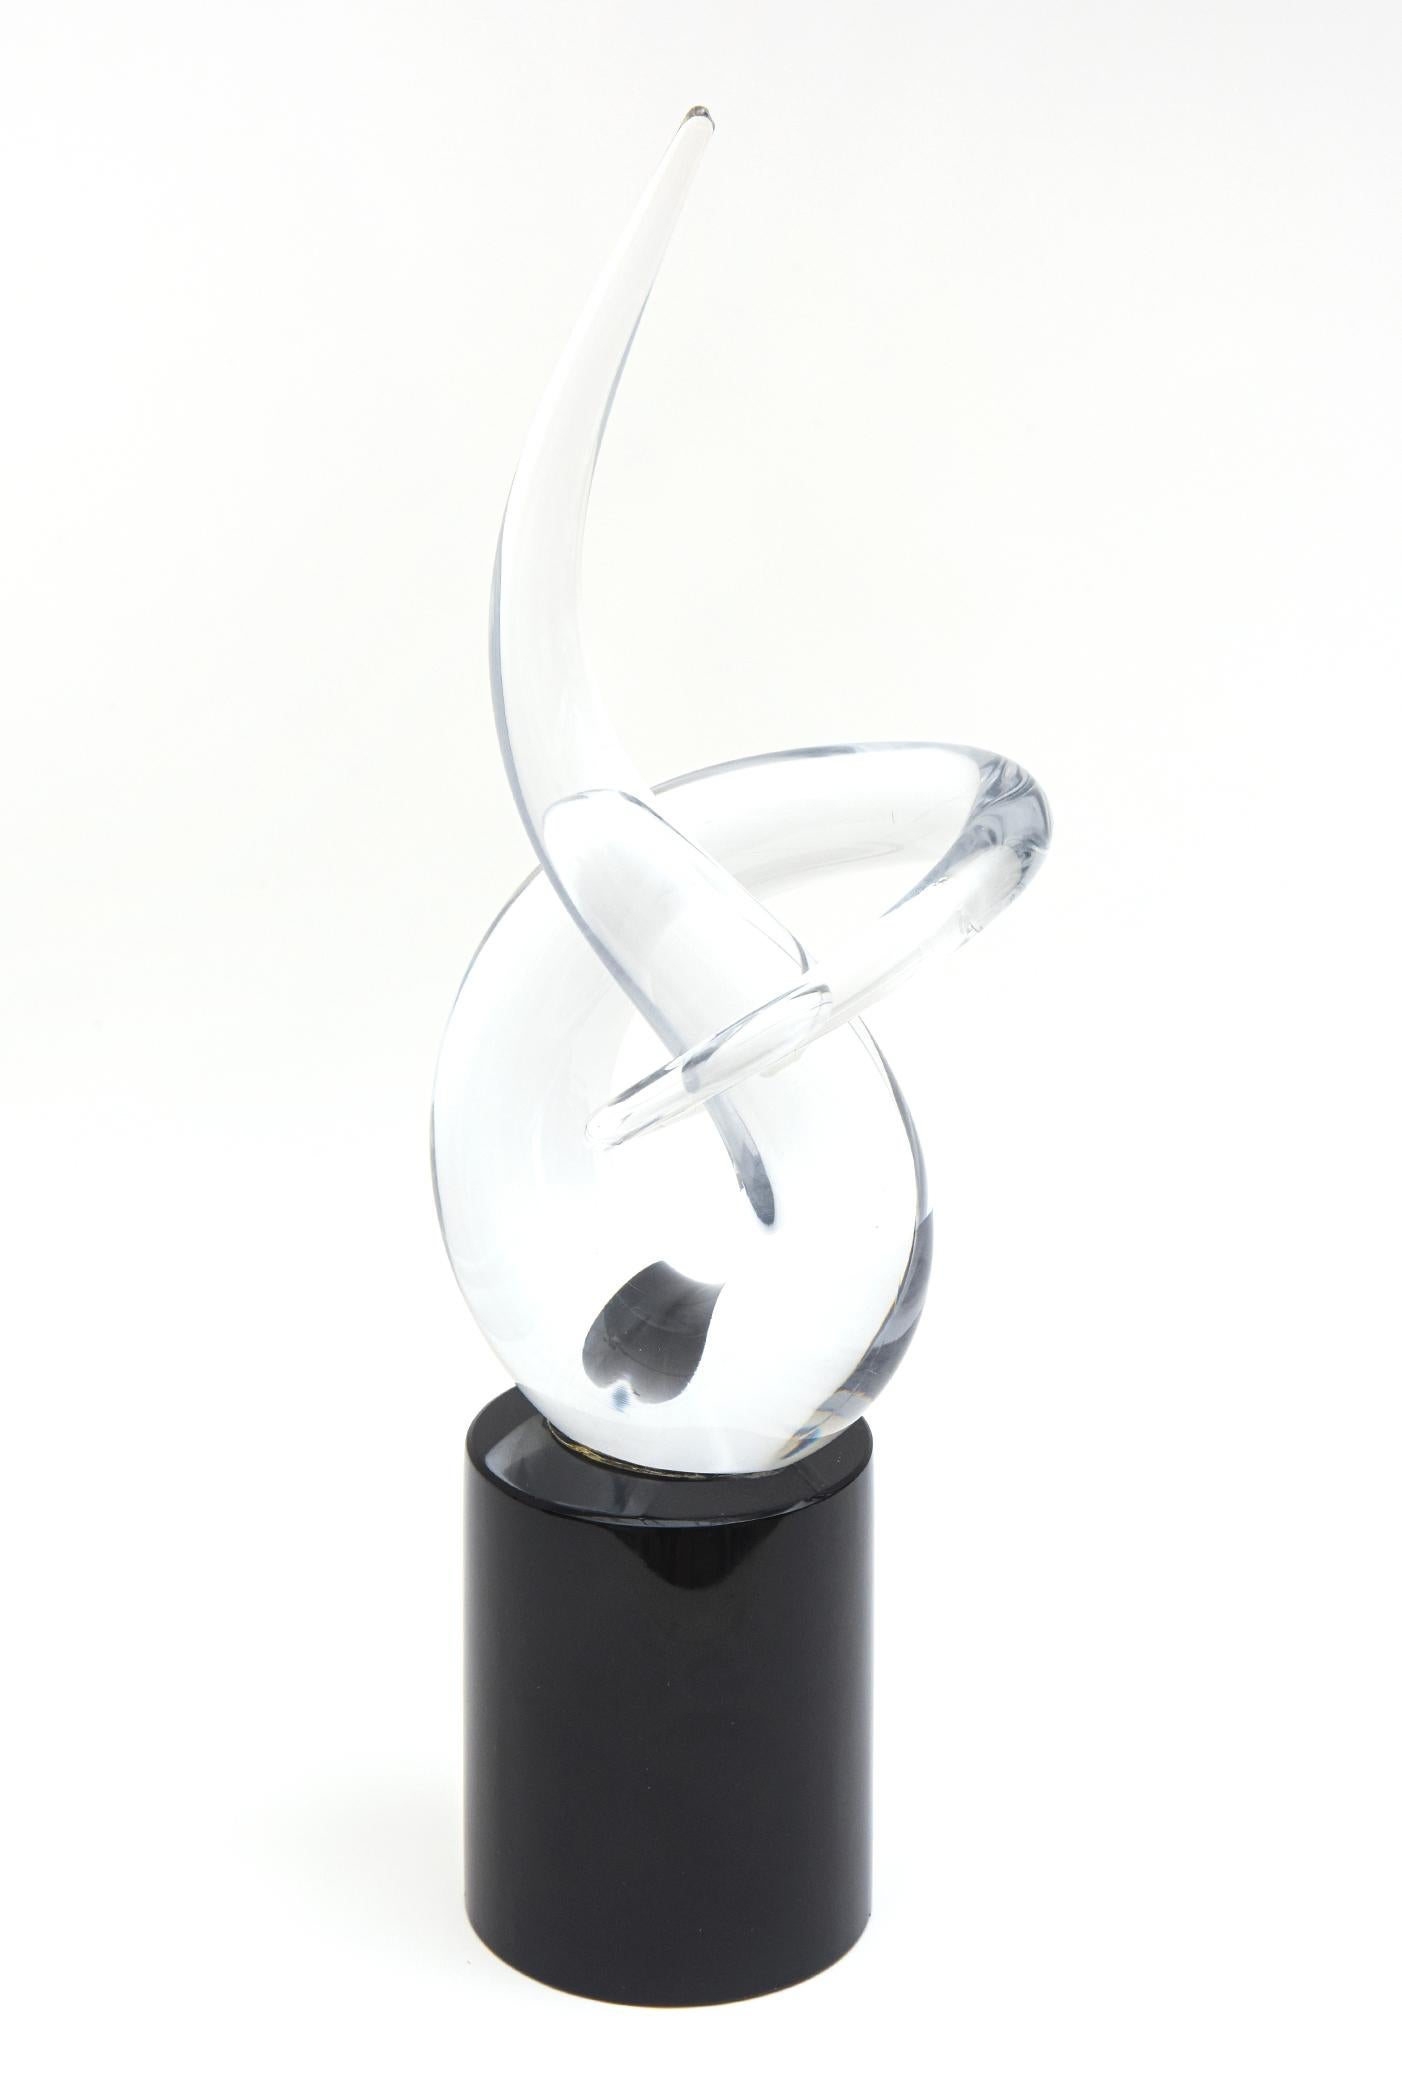 This lovely tall twisted signed Murano Italian glass sculpture is by Renato Anatra and is the love knot form. It is from the 70;s and the base is round cylinder black glass which that part is 5.5